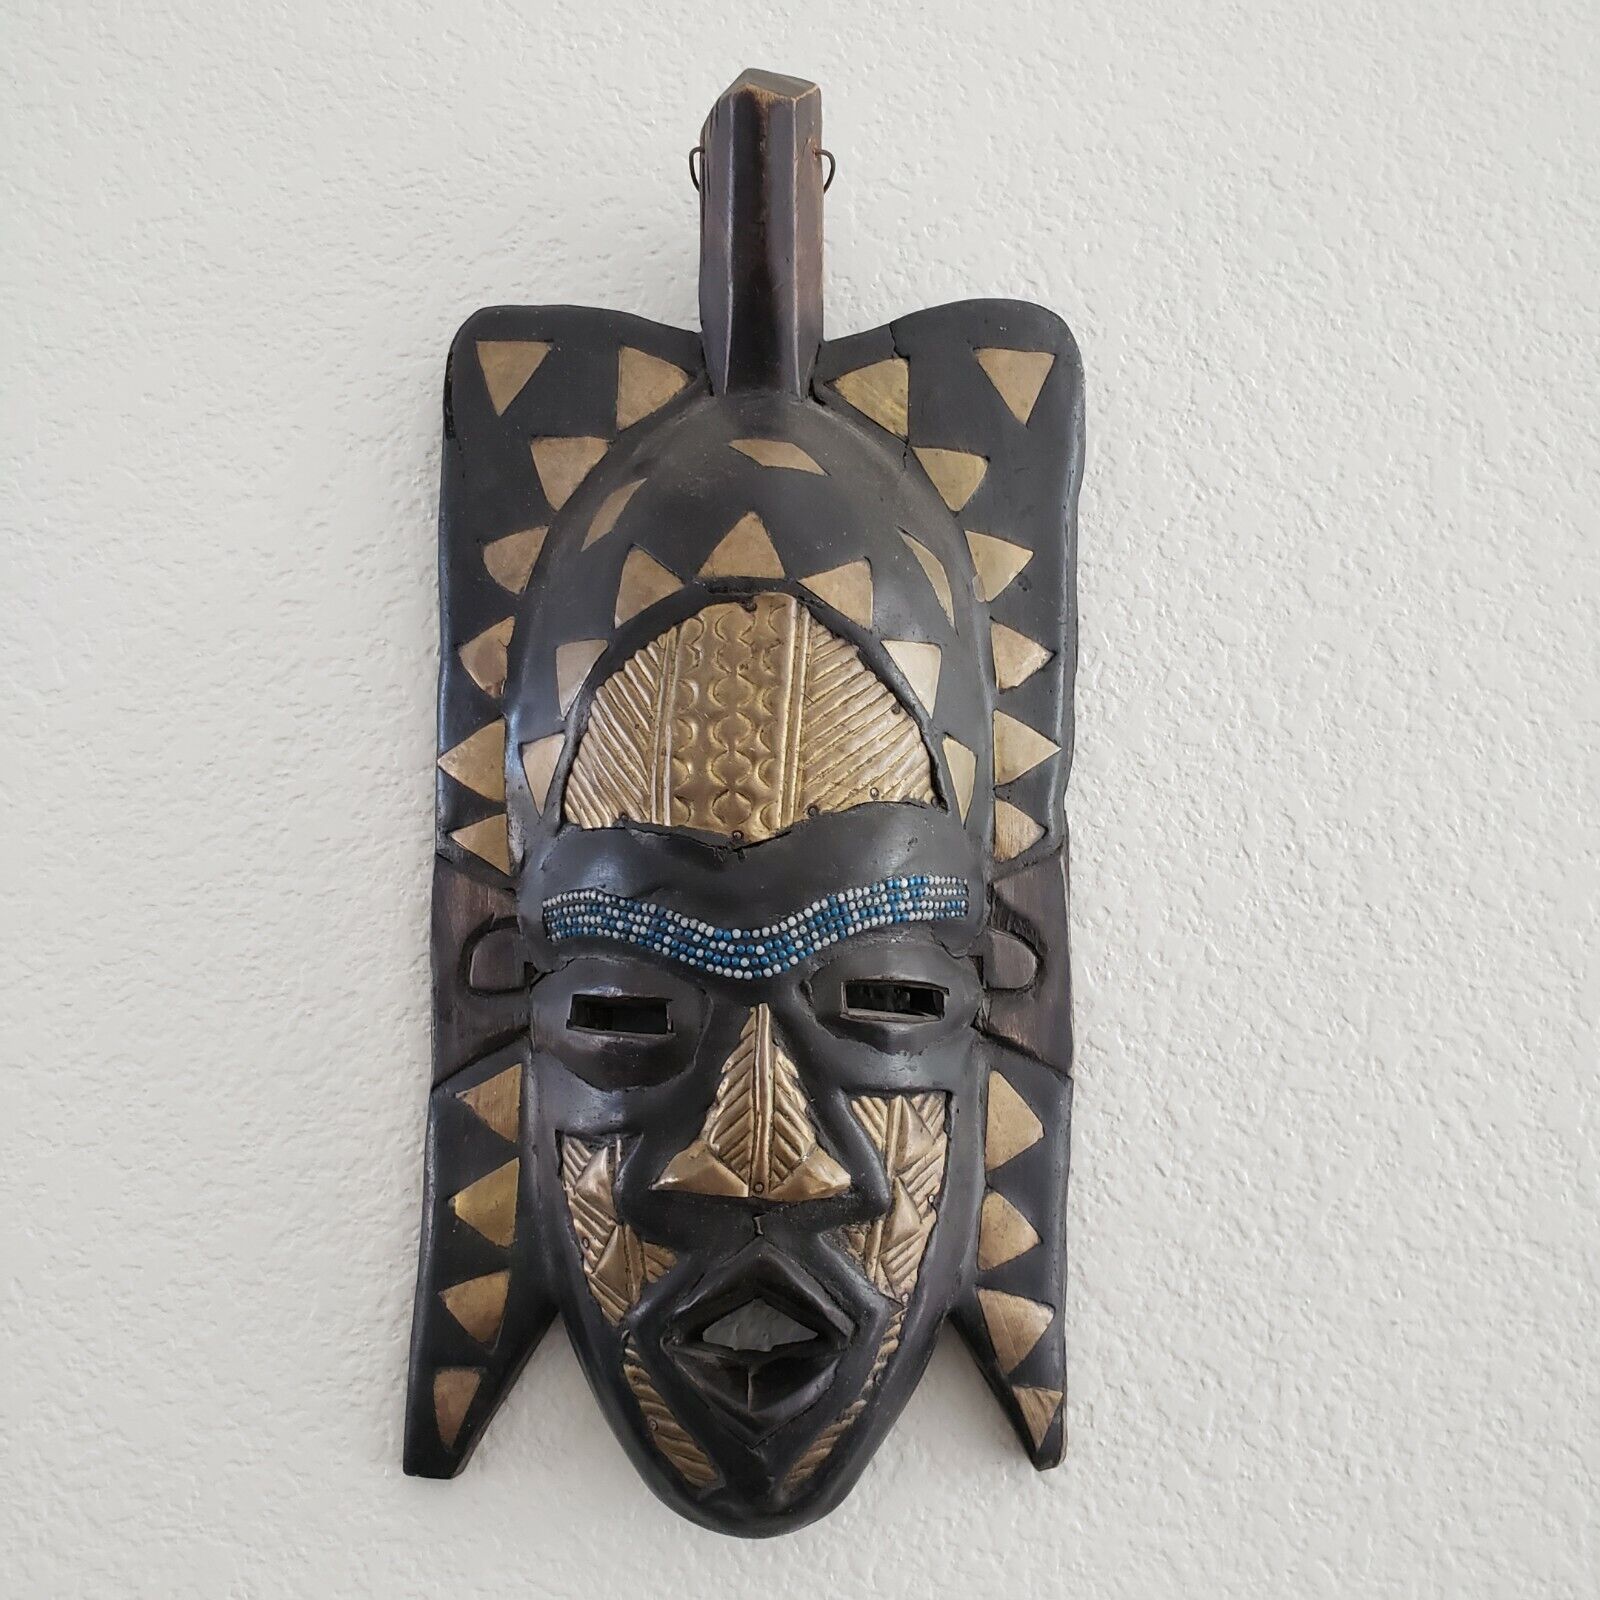 Temne Tribe African Queen's Mask-Eastern Art Arcade-Hand Made in Ghana